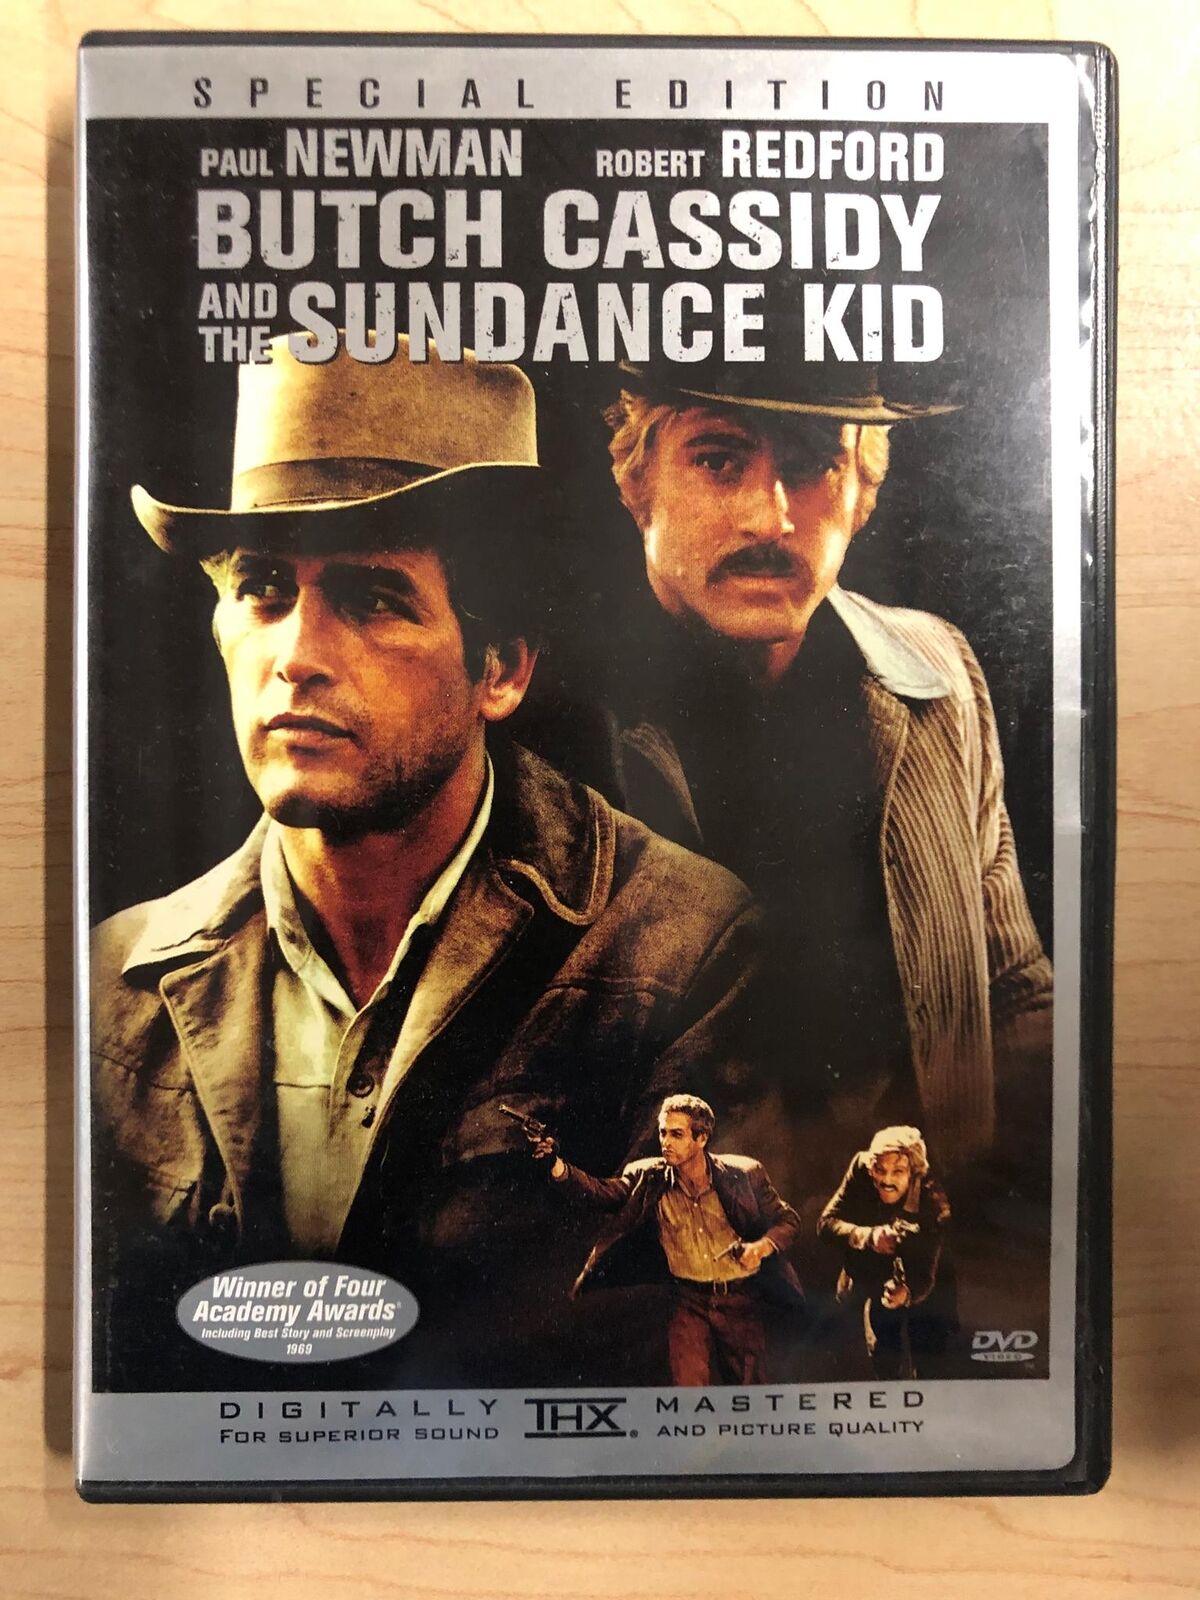 Butch Cassidy and the Sundance Kid (DVD, 1969, Special Edition) - K0107